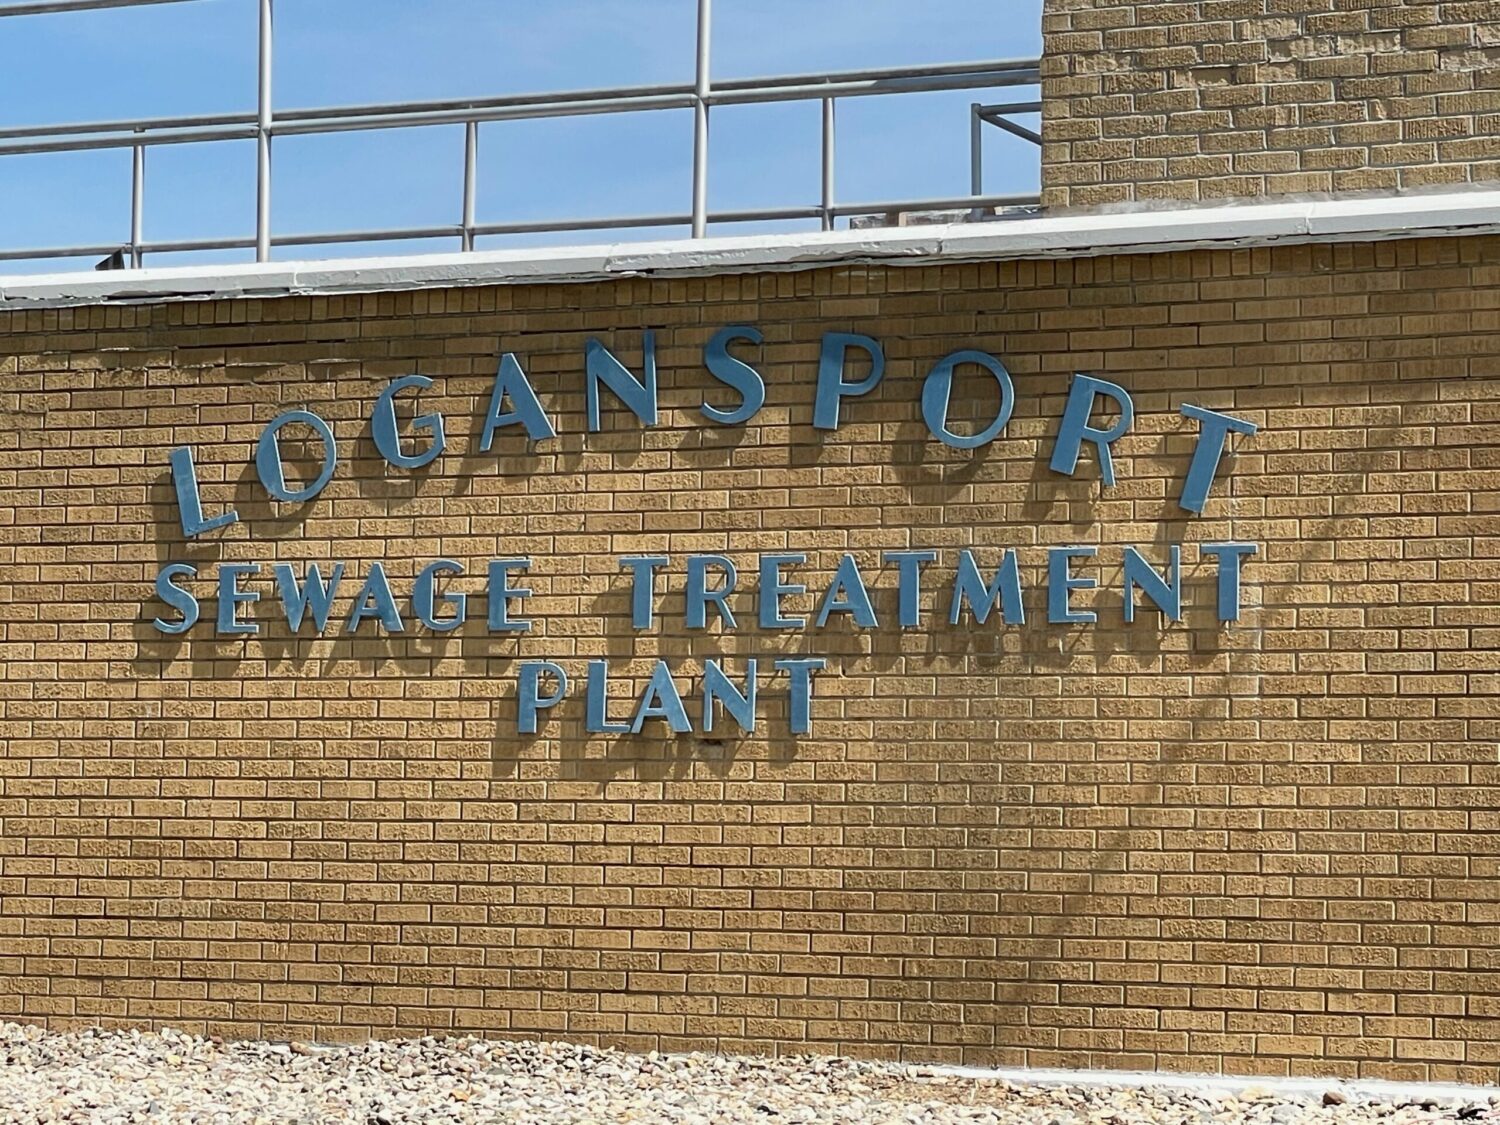 Brick building with signage that reads Logansport Sewage Treatment Plant